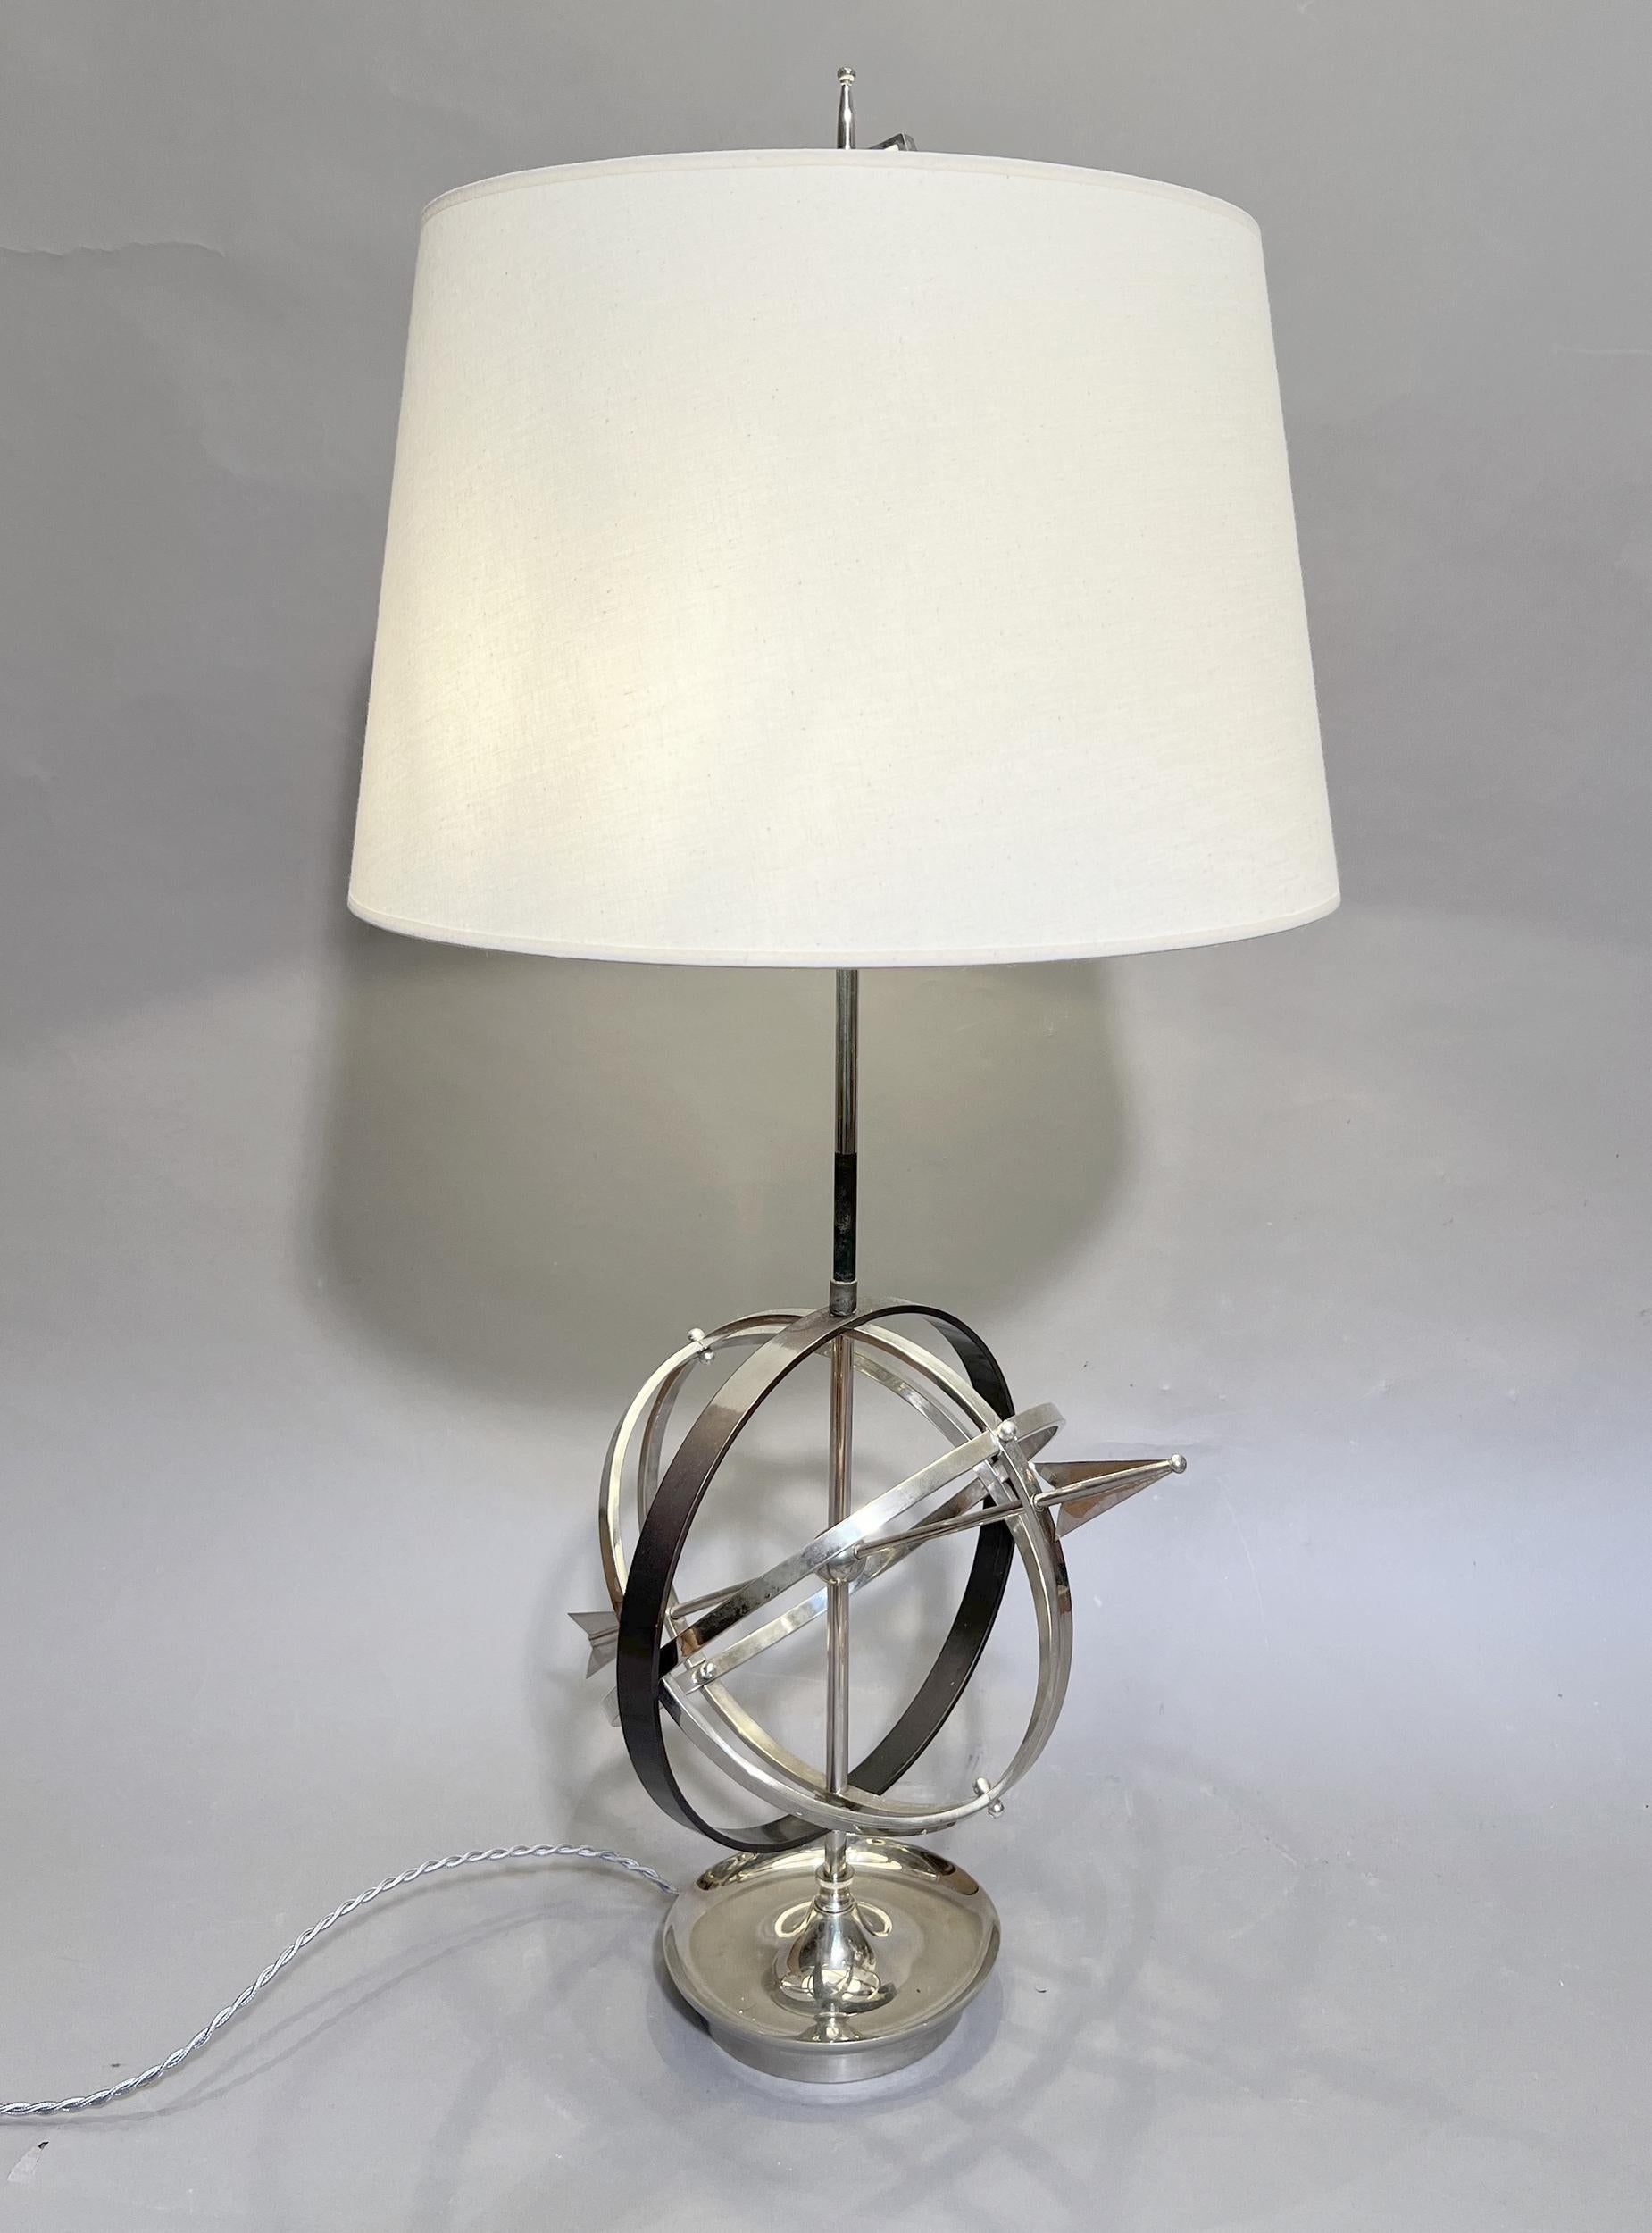 Large « bouillotte » style lamp in the shape of a celestial globe in silver-plated metal and metal with bronze patina. Recent lampshade identical to the original.
Two light bulbs.
Height: 84 cm (33 inches)
Lampshade diameter: 40cm (15.8 inches)
Base